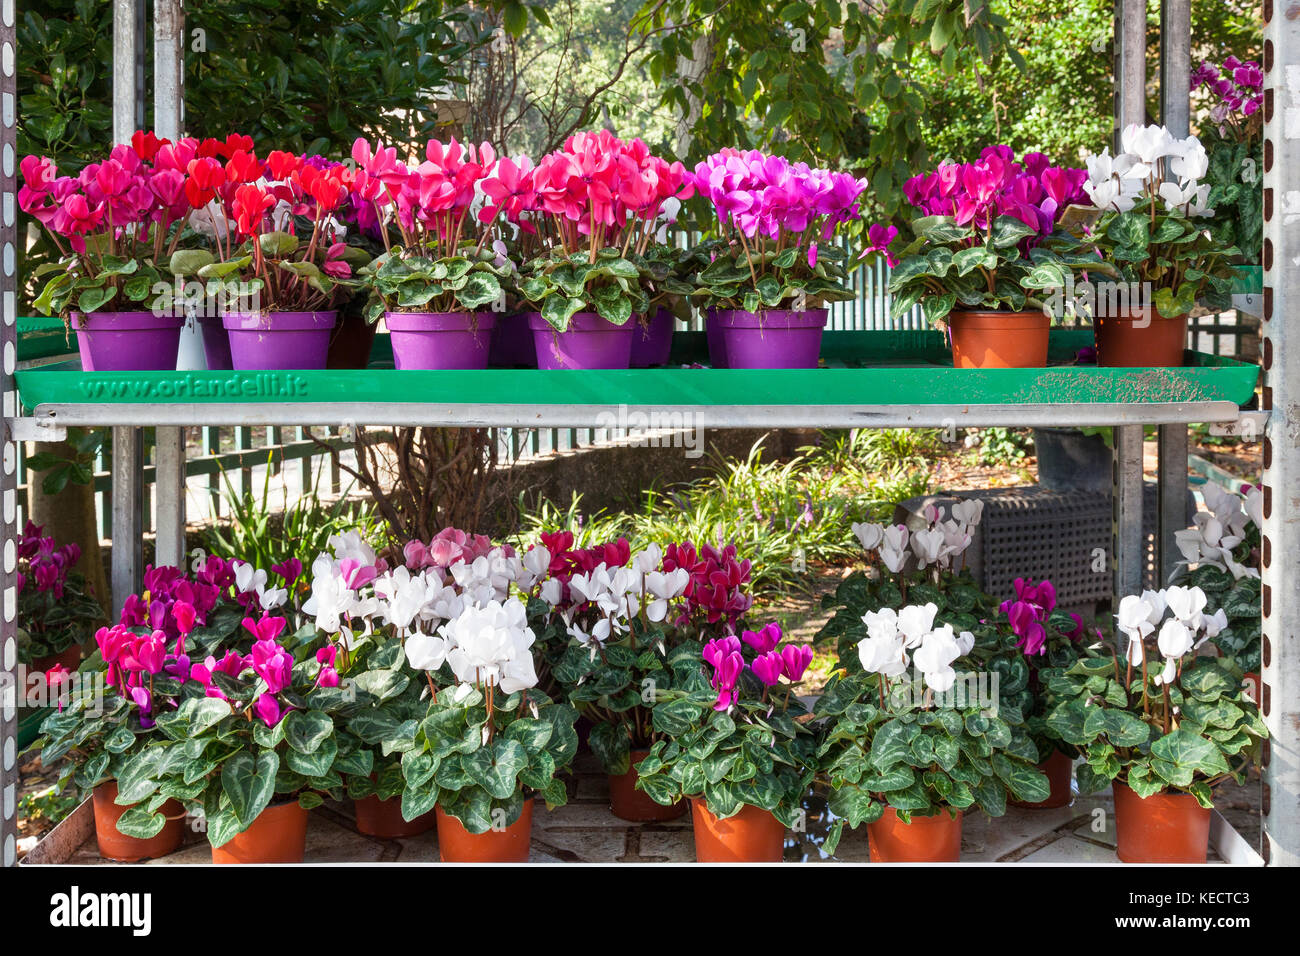 Potted cyclamen, Primulaceae,  in assorted bright colors on outdoor shelves at a nursery in early autumn or fall in a close up view Stock Photo